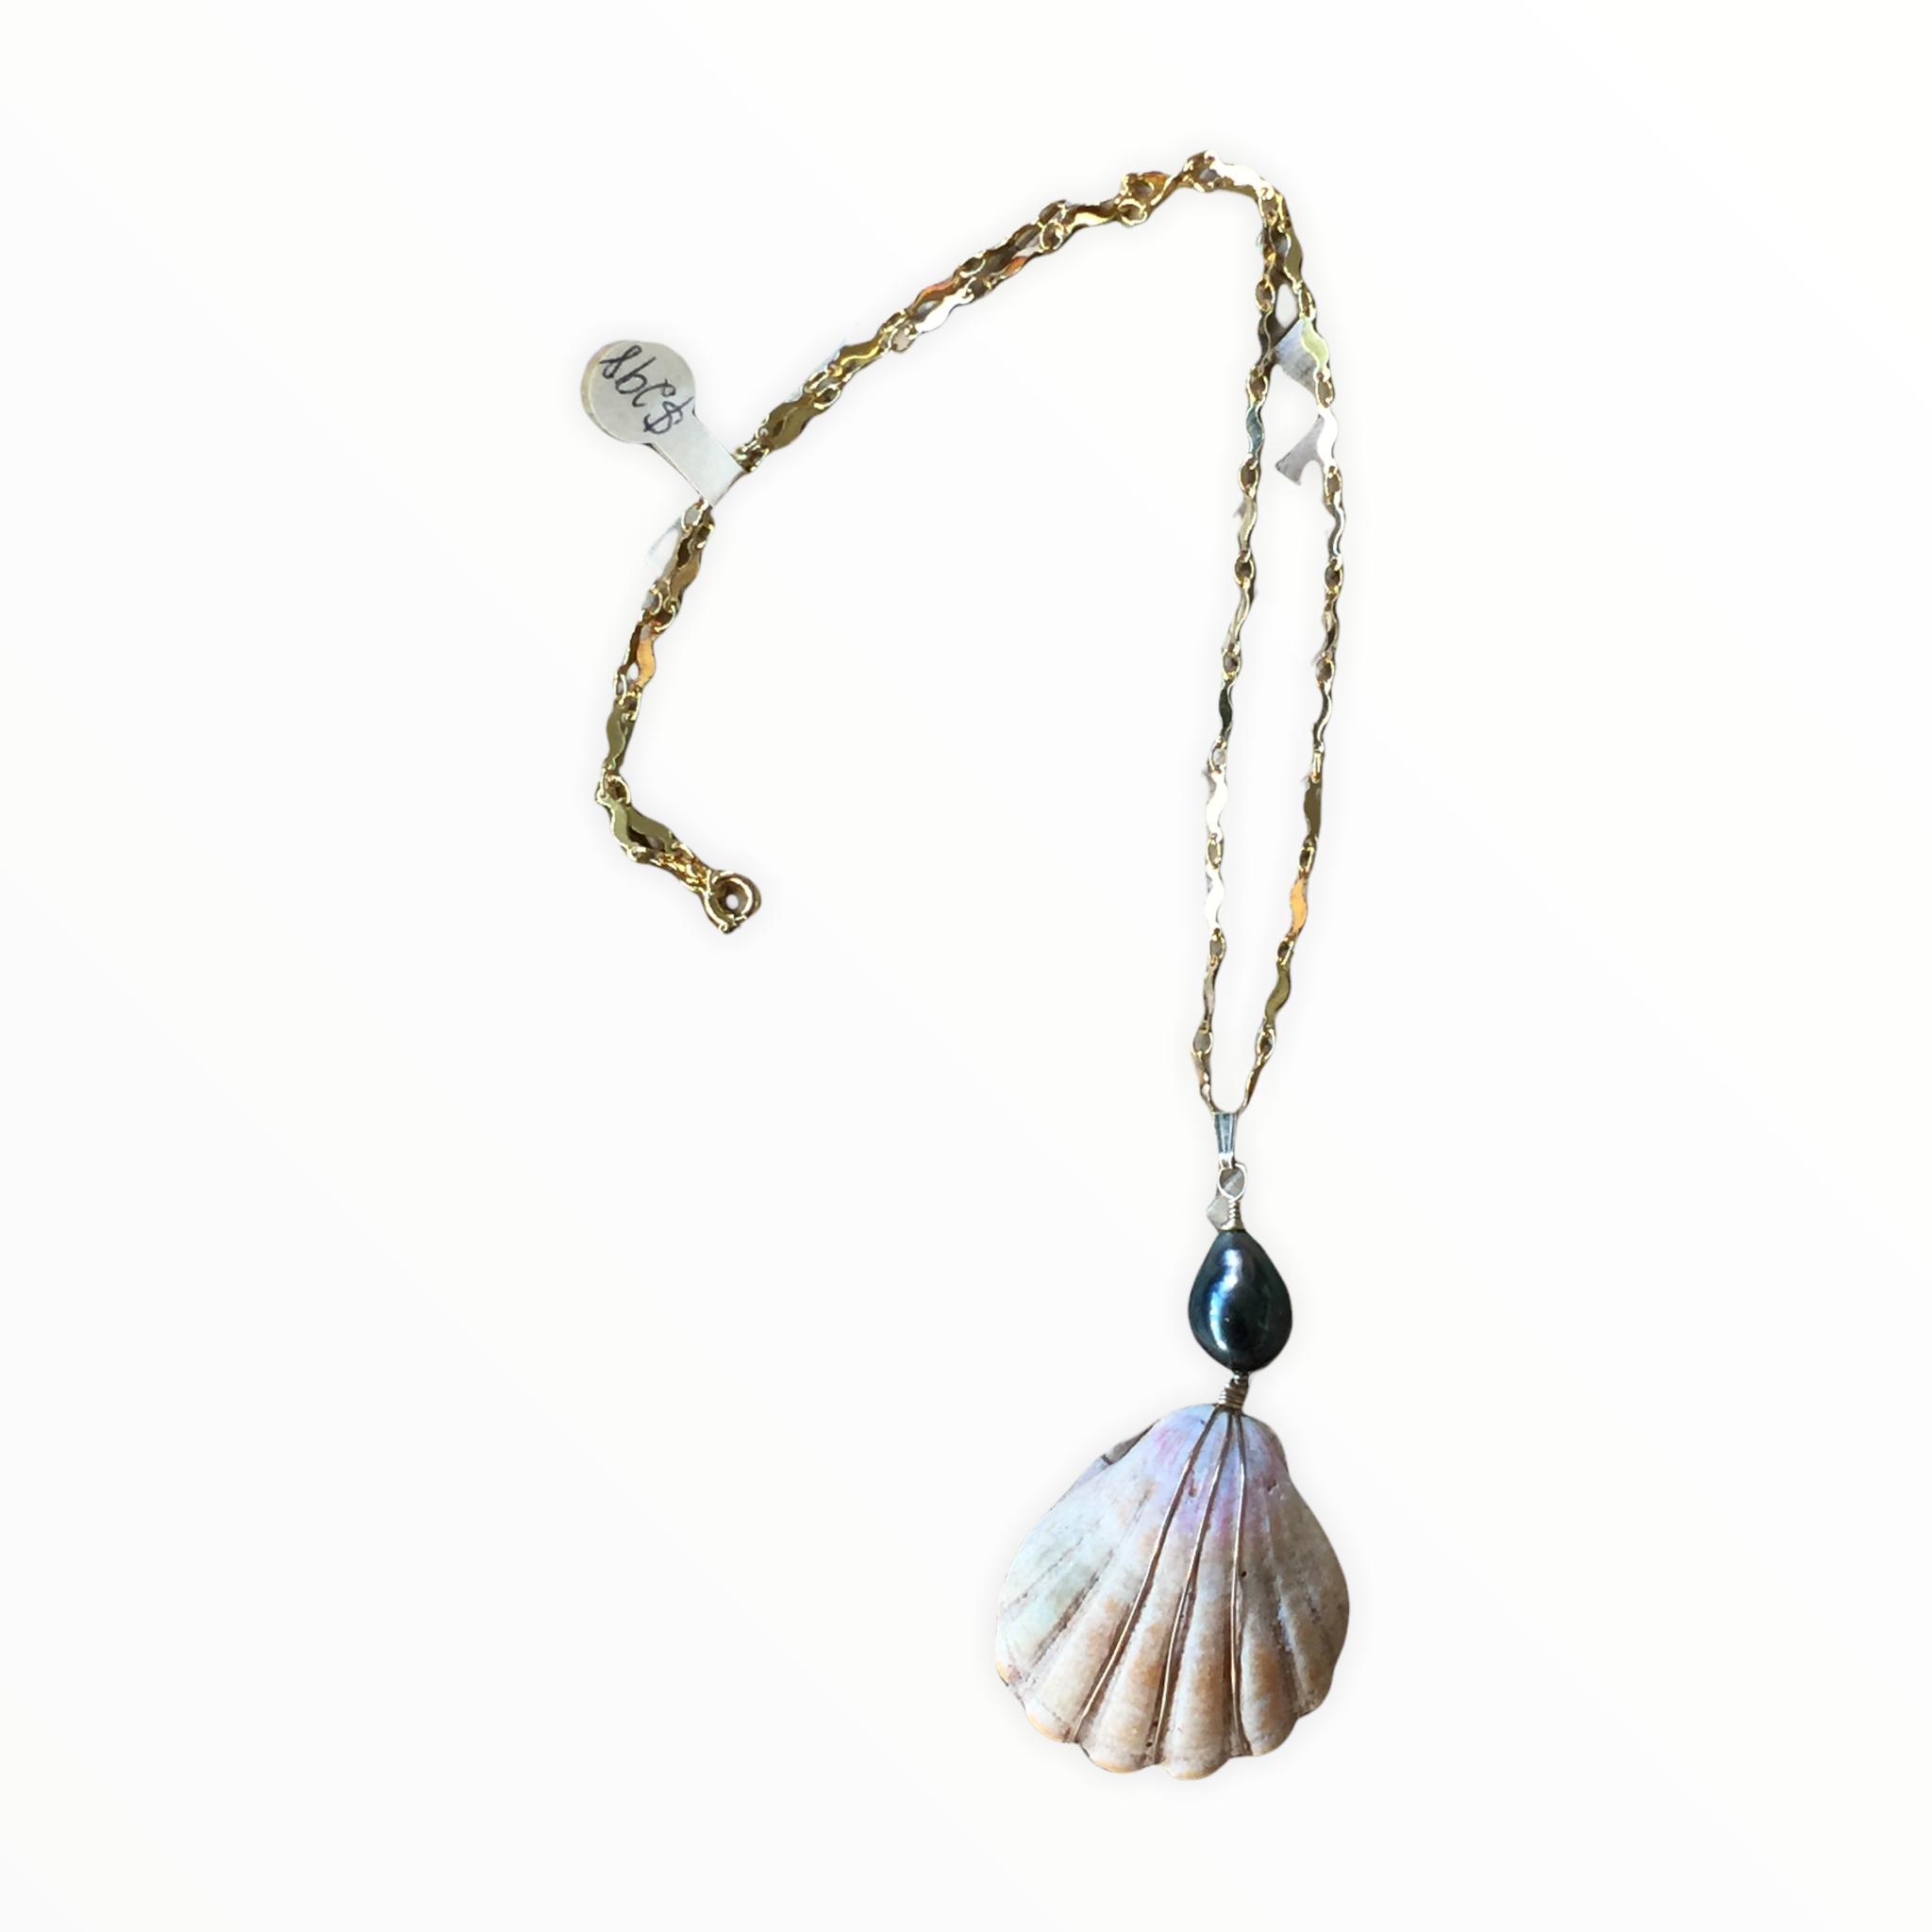 Sunrise Shell Necklace with Tahitian Pearl - Honorooroo Lifestyle